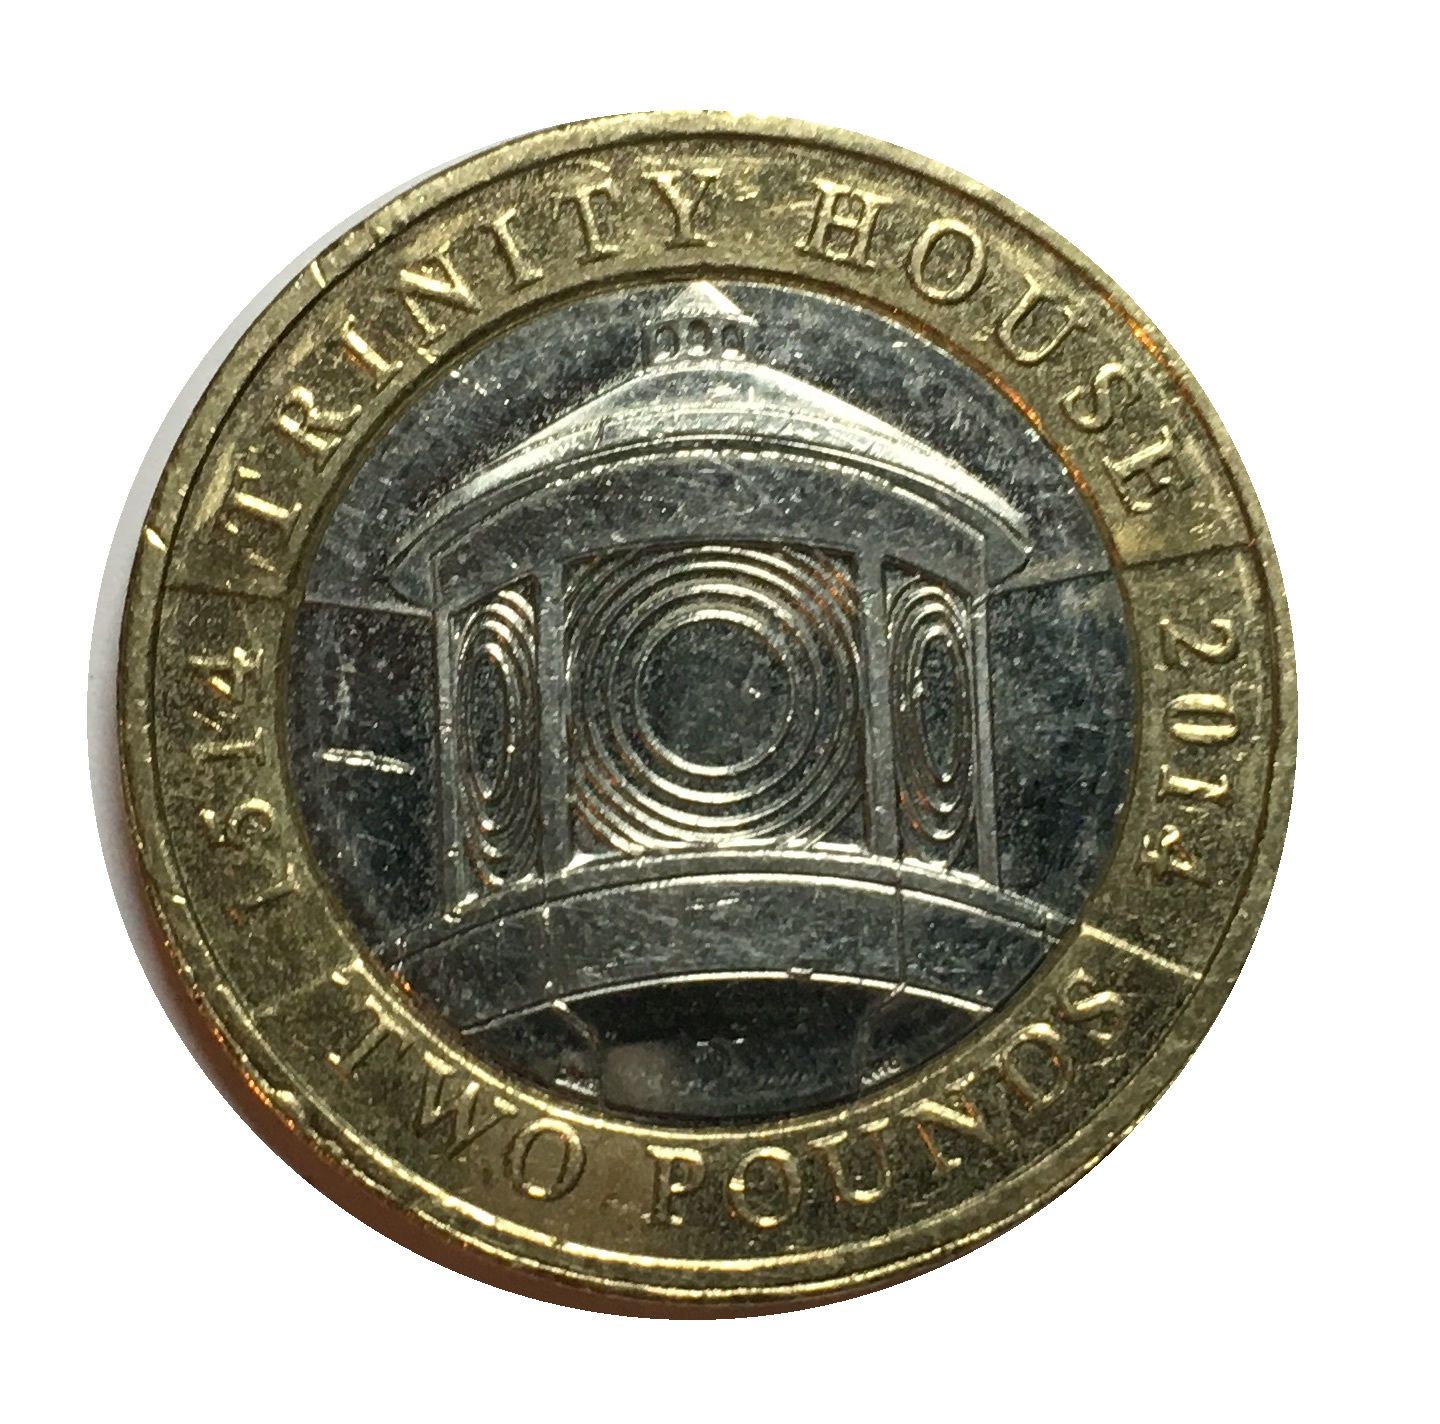 2014 Two Pounds Coin